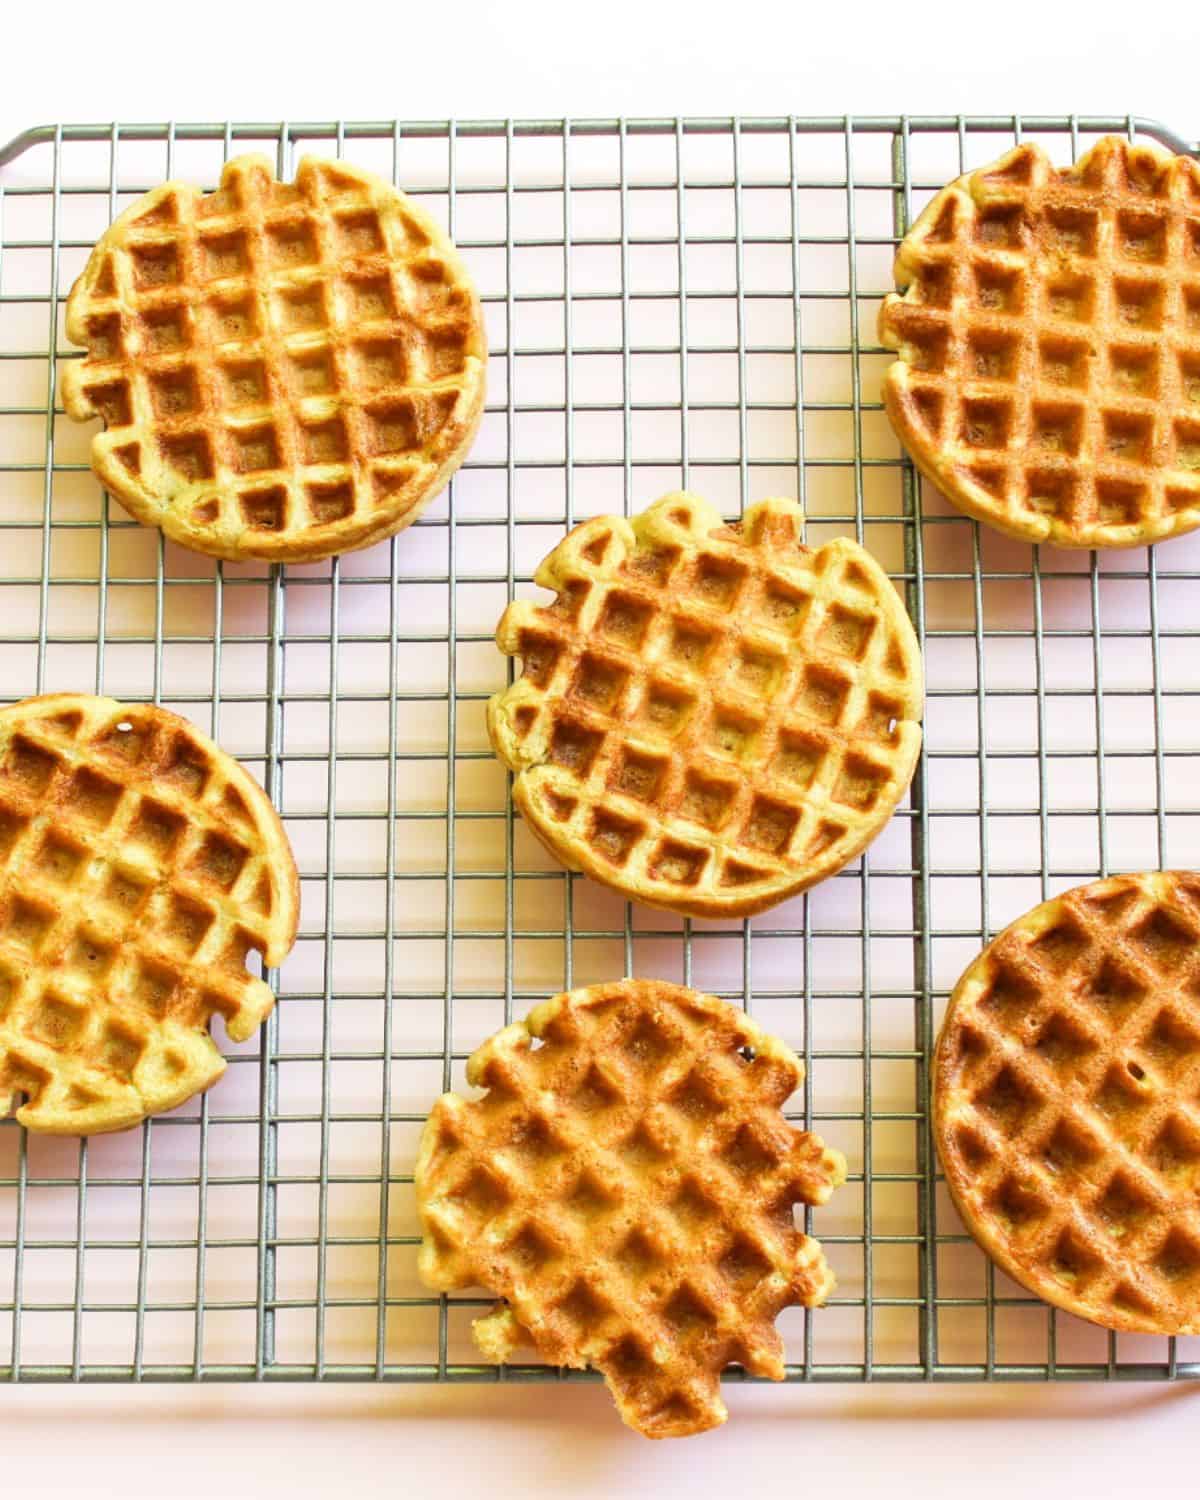 Six golden waffles are arranged on a wire rack.